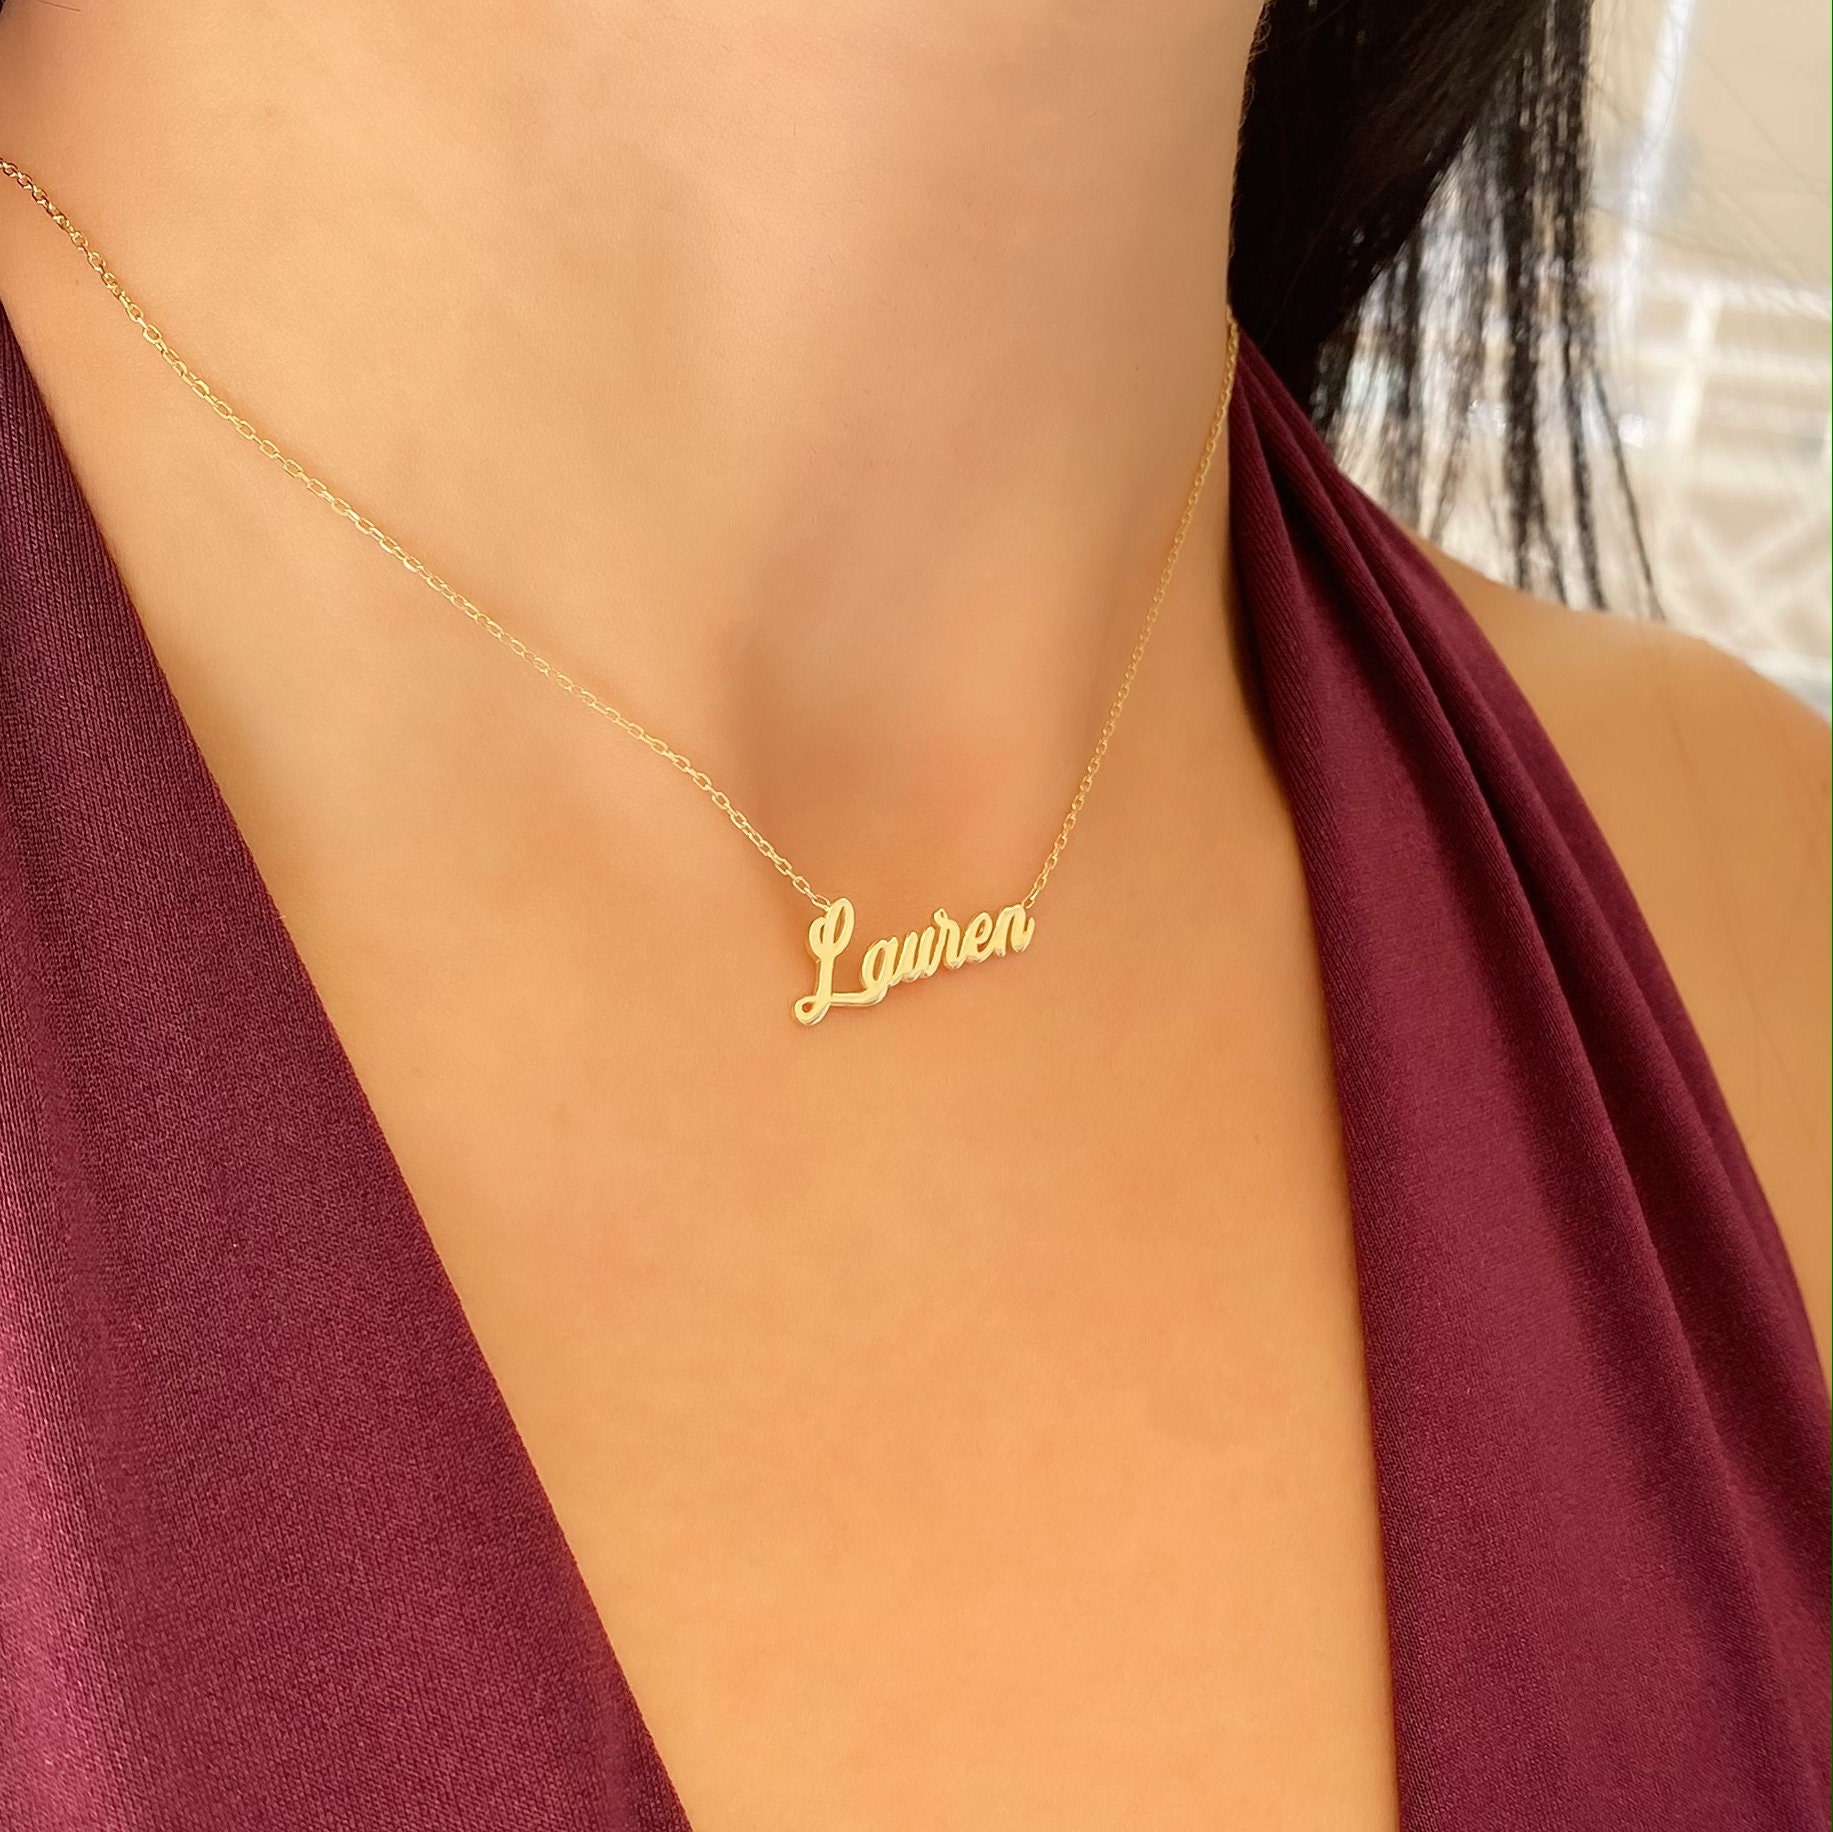 Custom Name Necklace Bridesmaid Gifts Gifts For Her | Etsy